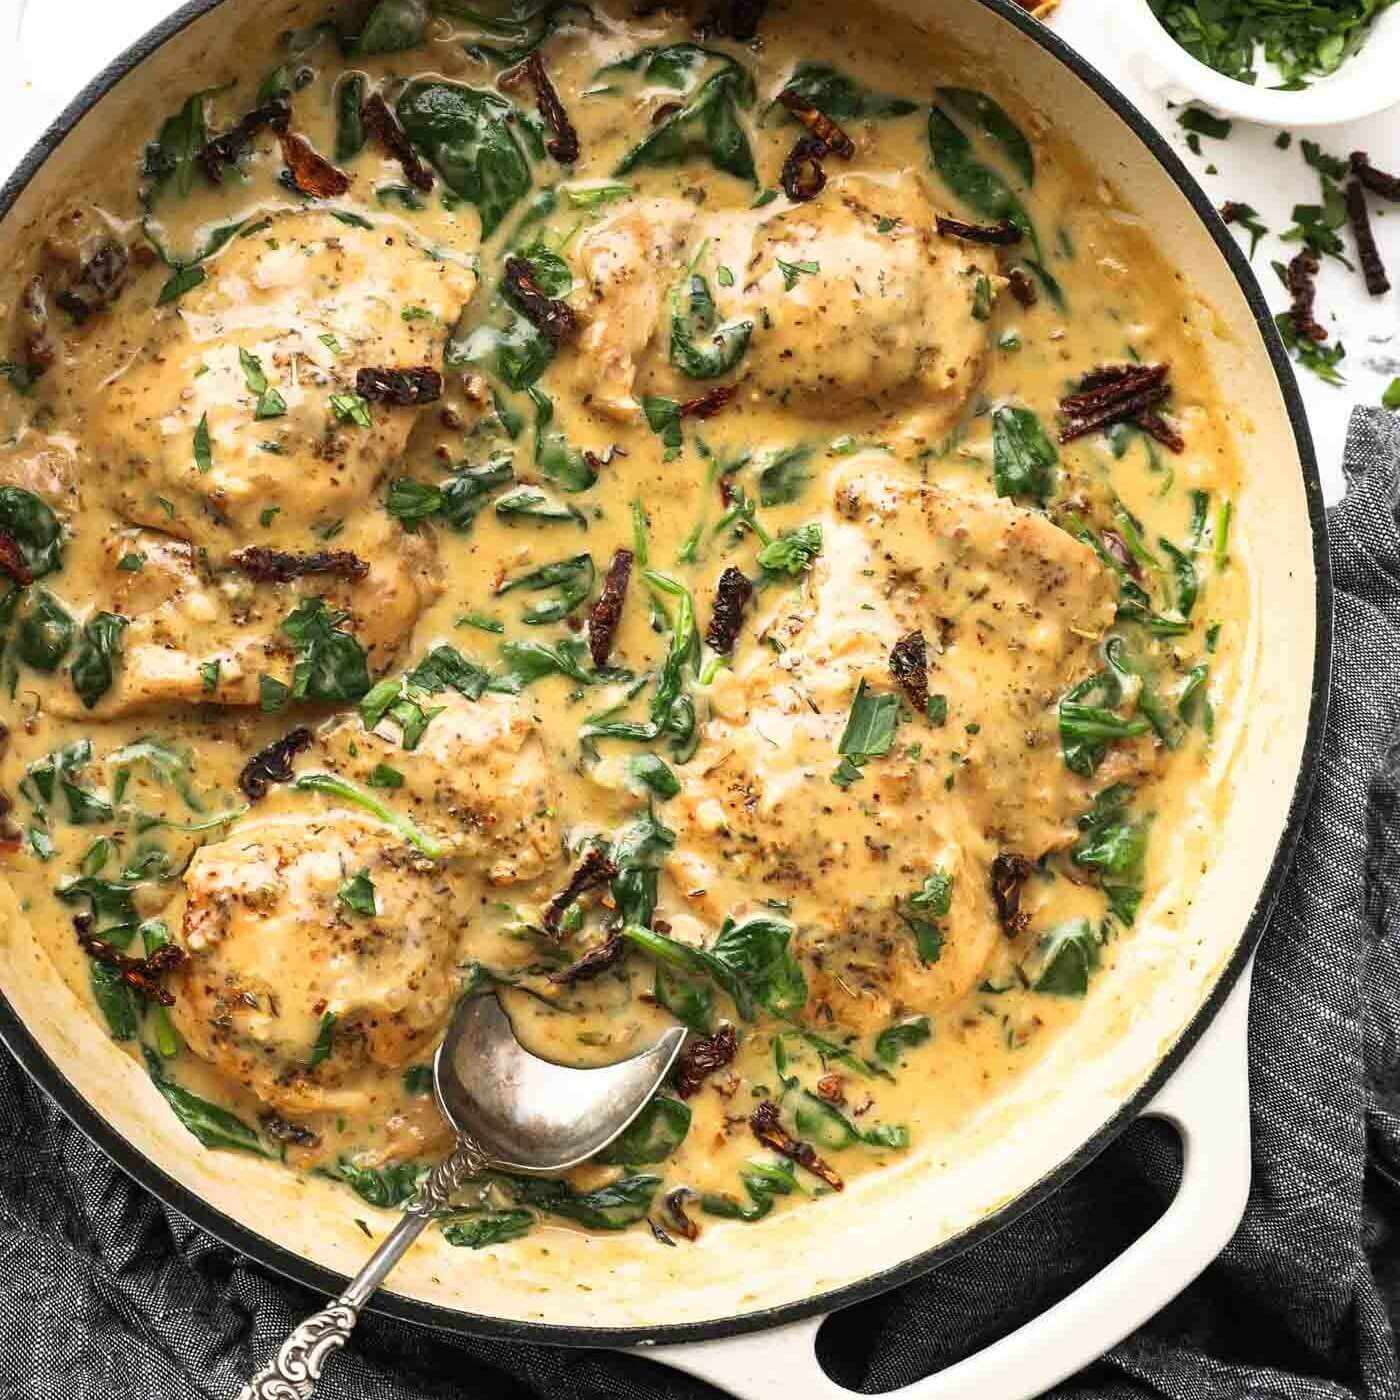 25-Minute Creamy Tuscan Chicken (No Dairy) - Real Simple Good